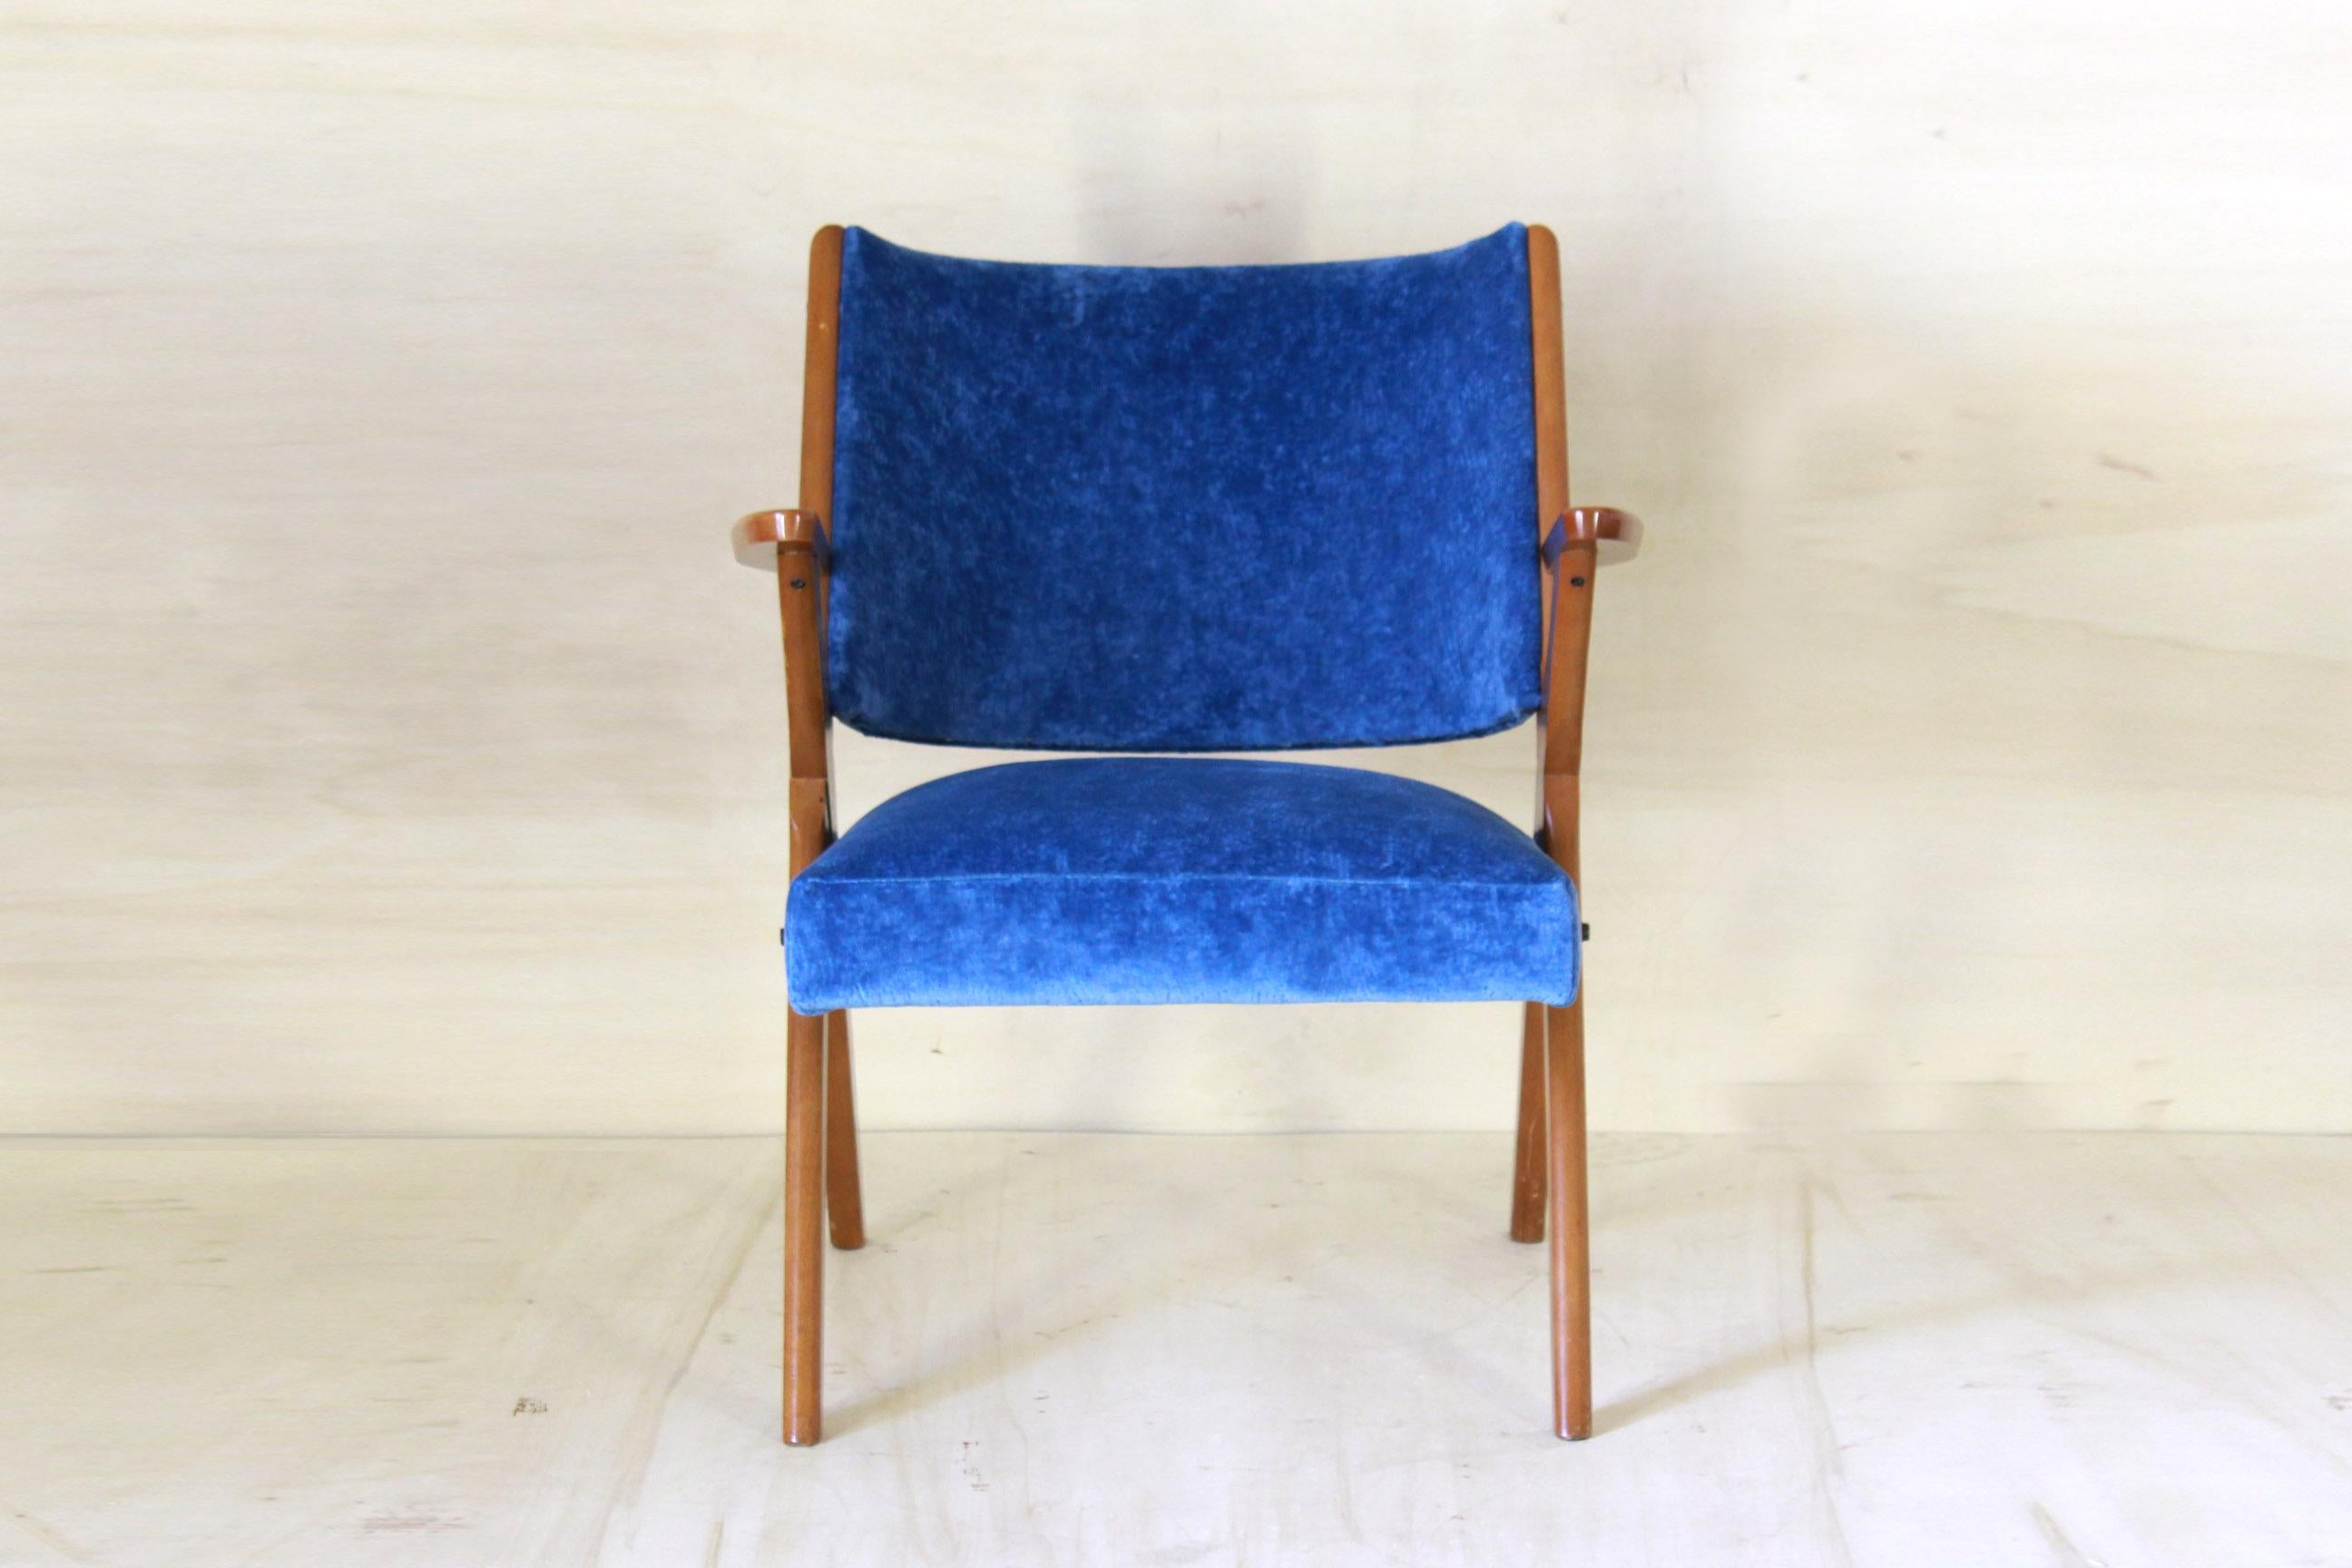 Vintage Velvet Blue Armchair, Dal Vera, Italy 1960s
A 1960s made in Italy vintage armchair with solid wood structure and blue velvet seat and backseat.

The wood has been cleaned and polished meanwhile the seat and back seat filling changed.

The